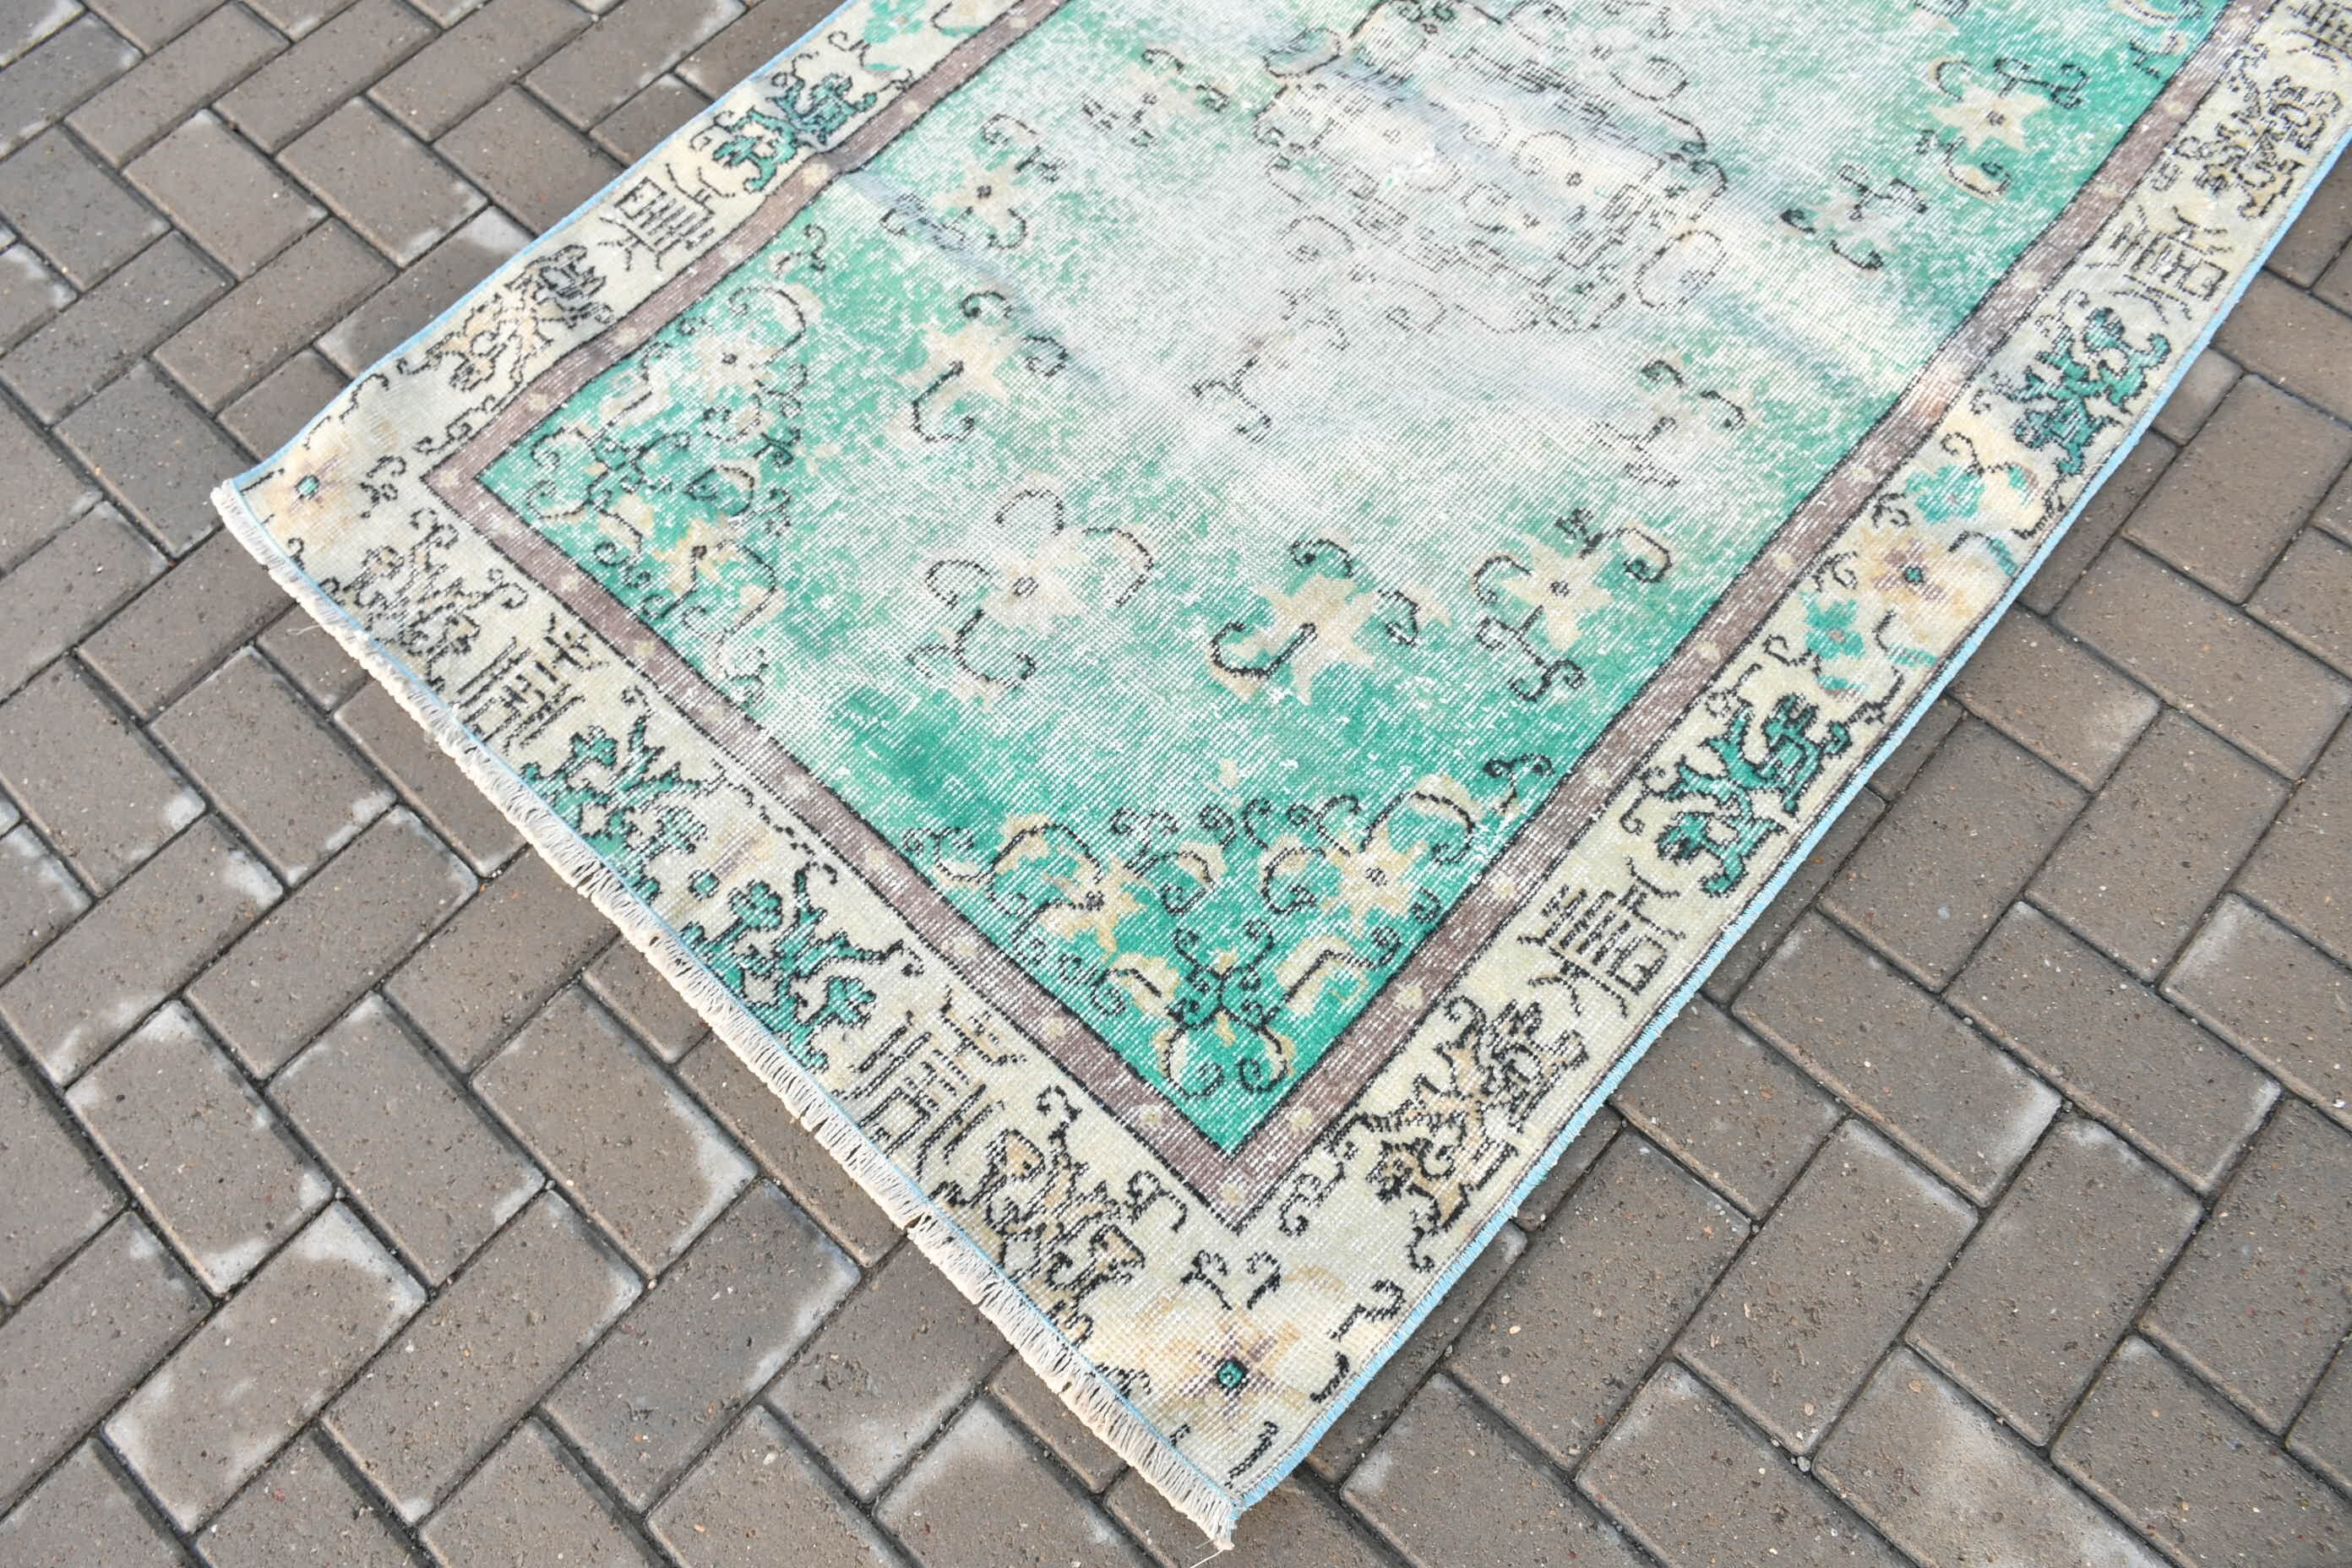 Anatolian Rug, Oushak Rugs, Green Bedroom Rugs, Turkish Rug, Entry Rug, Kitchen Rug, Vintage Rug, Rugs for Bedroom, 3.6x6.1 ft Accent Rugs